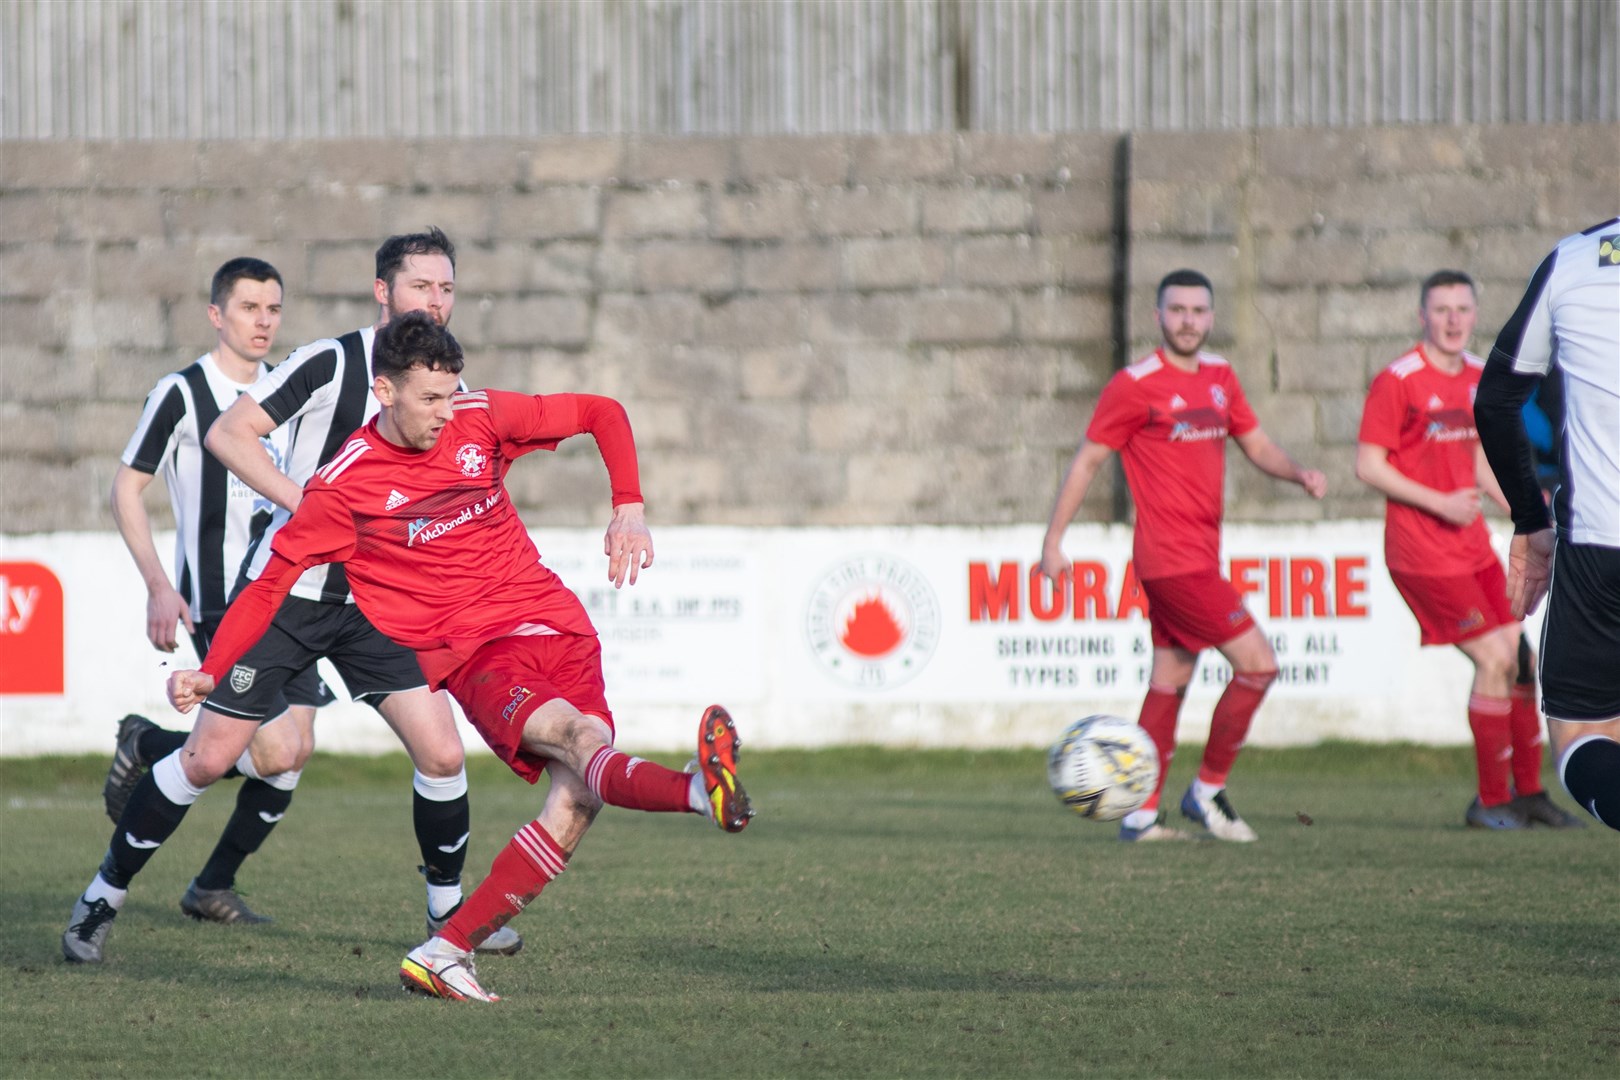 Ryan Farquhar takes a shot on goal for the home side during the first half...Lossiemouth FC vs Fraserburgh FC - Highland League Football - Grant Park, Lossiemouth 19/02/2022...Picture: Daniel Forsyth..